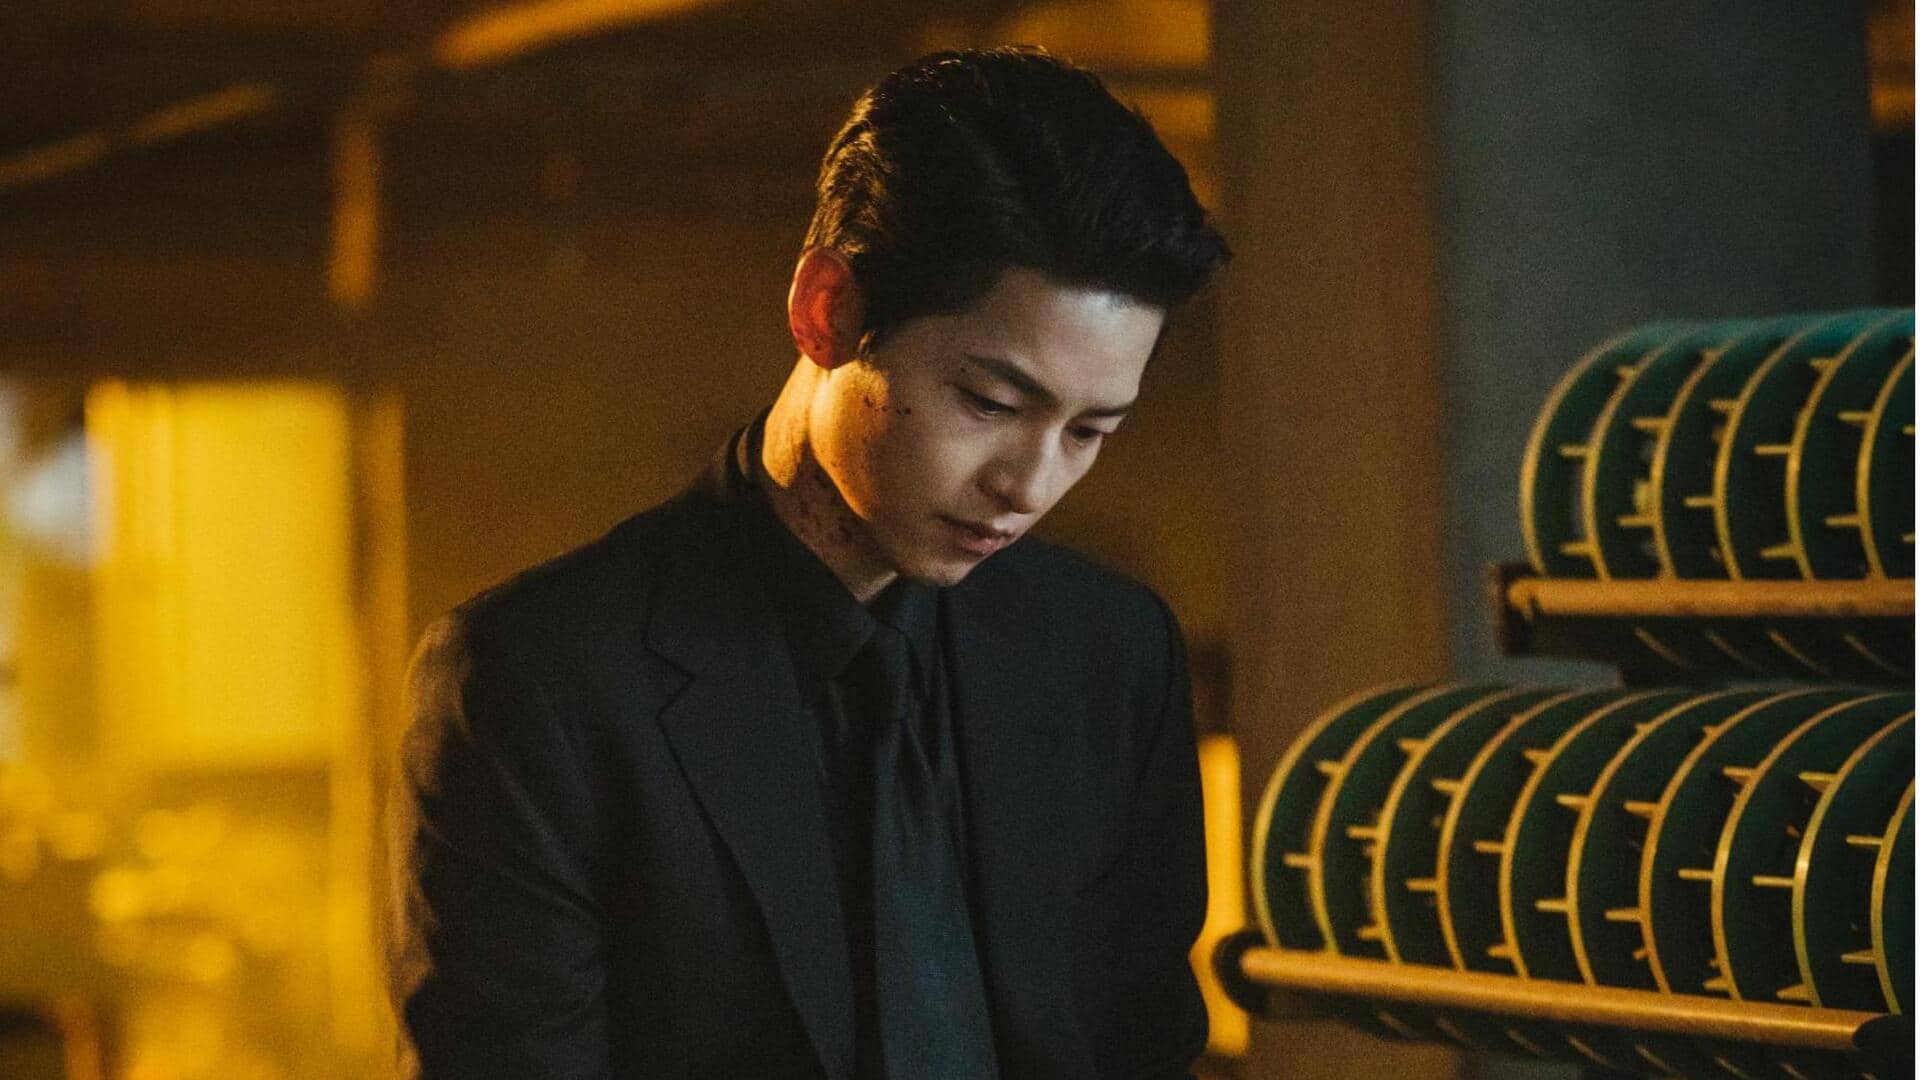 Song Joong-ki to star in K-drama titled 'MY YOUTH'